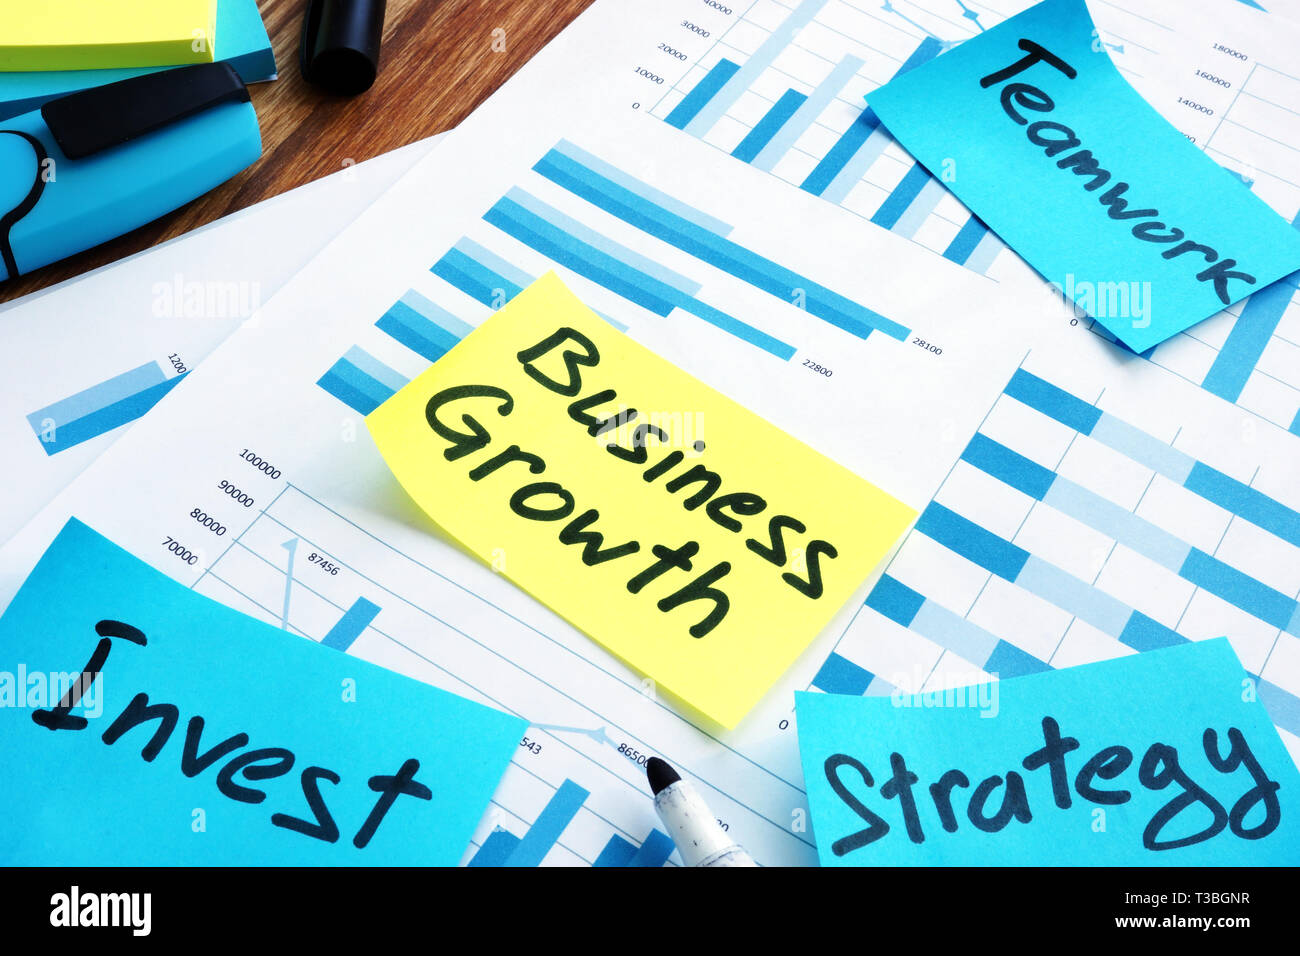 Business growth concept. Report and marks invest, teamwork and strategy. Stock Photo